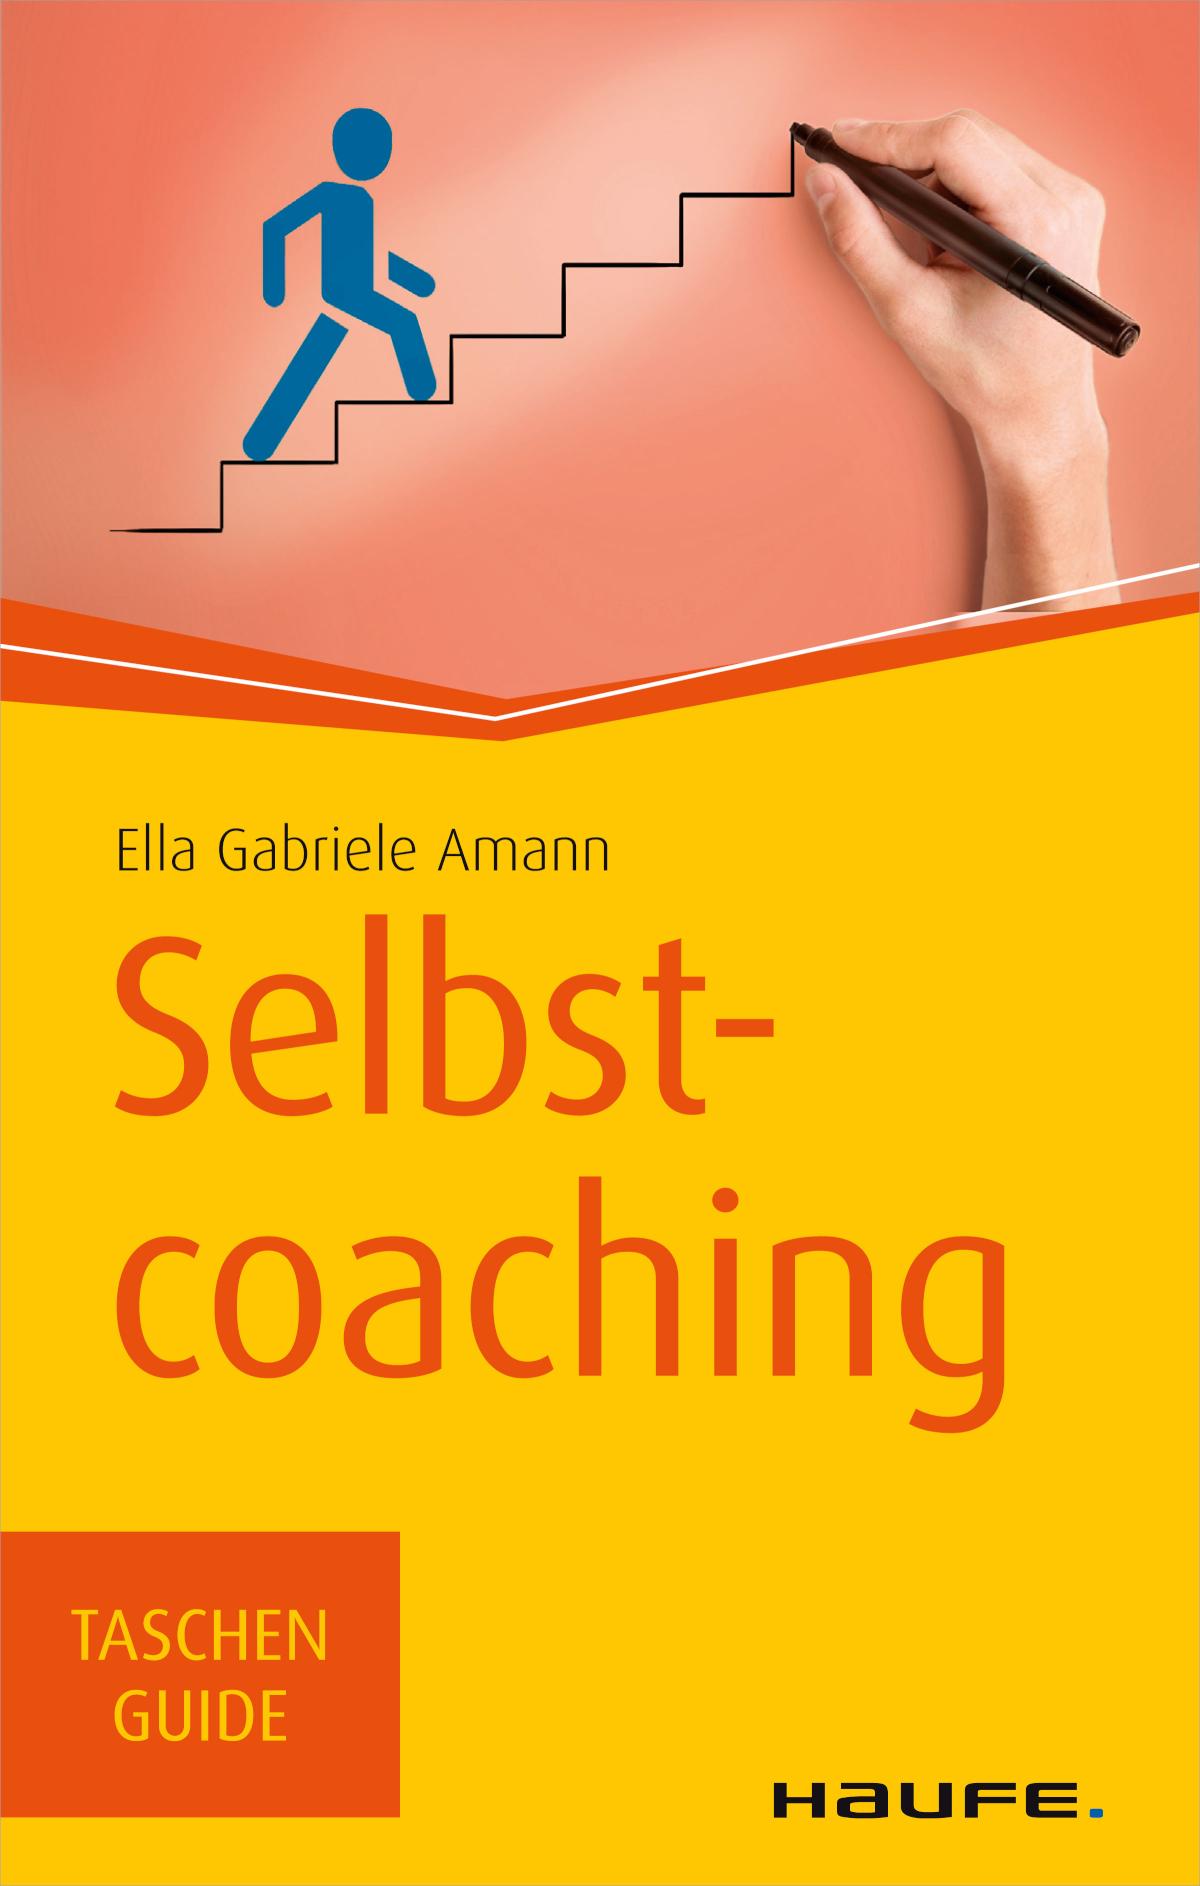 Selbstcoaching TaschenGuide